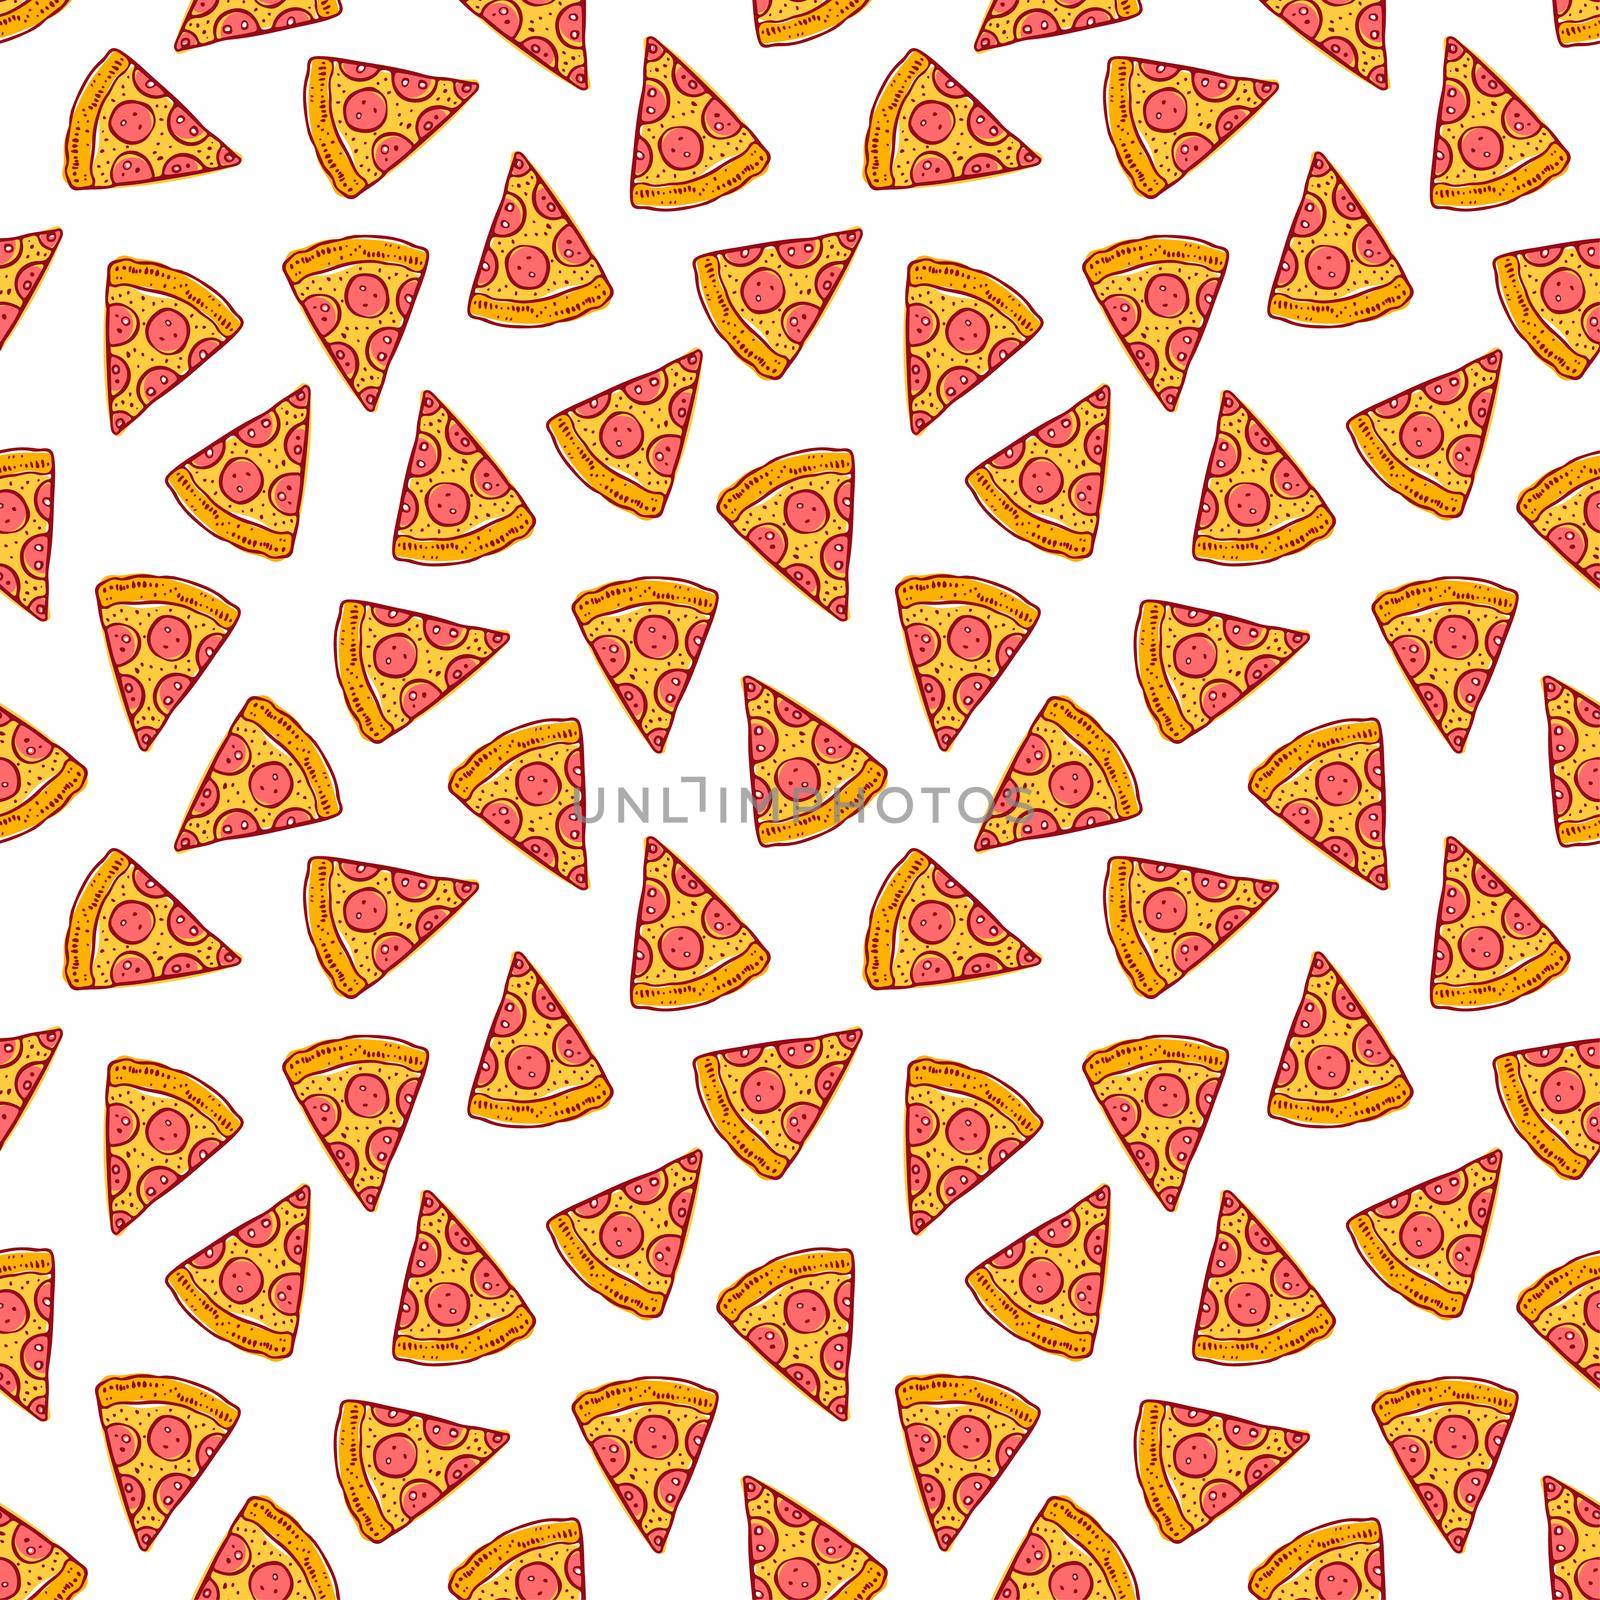 cute seamless background of delicious pizza slices. hand-drawn illustration